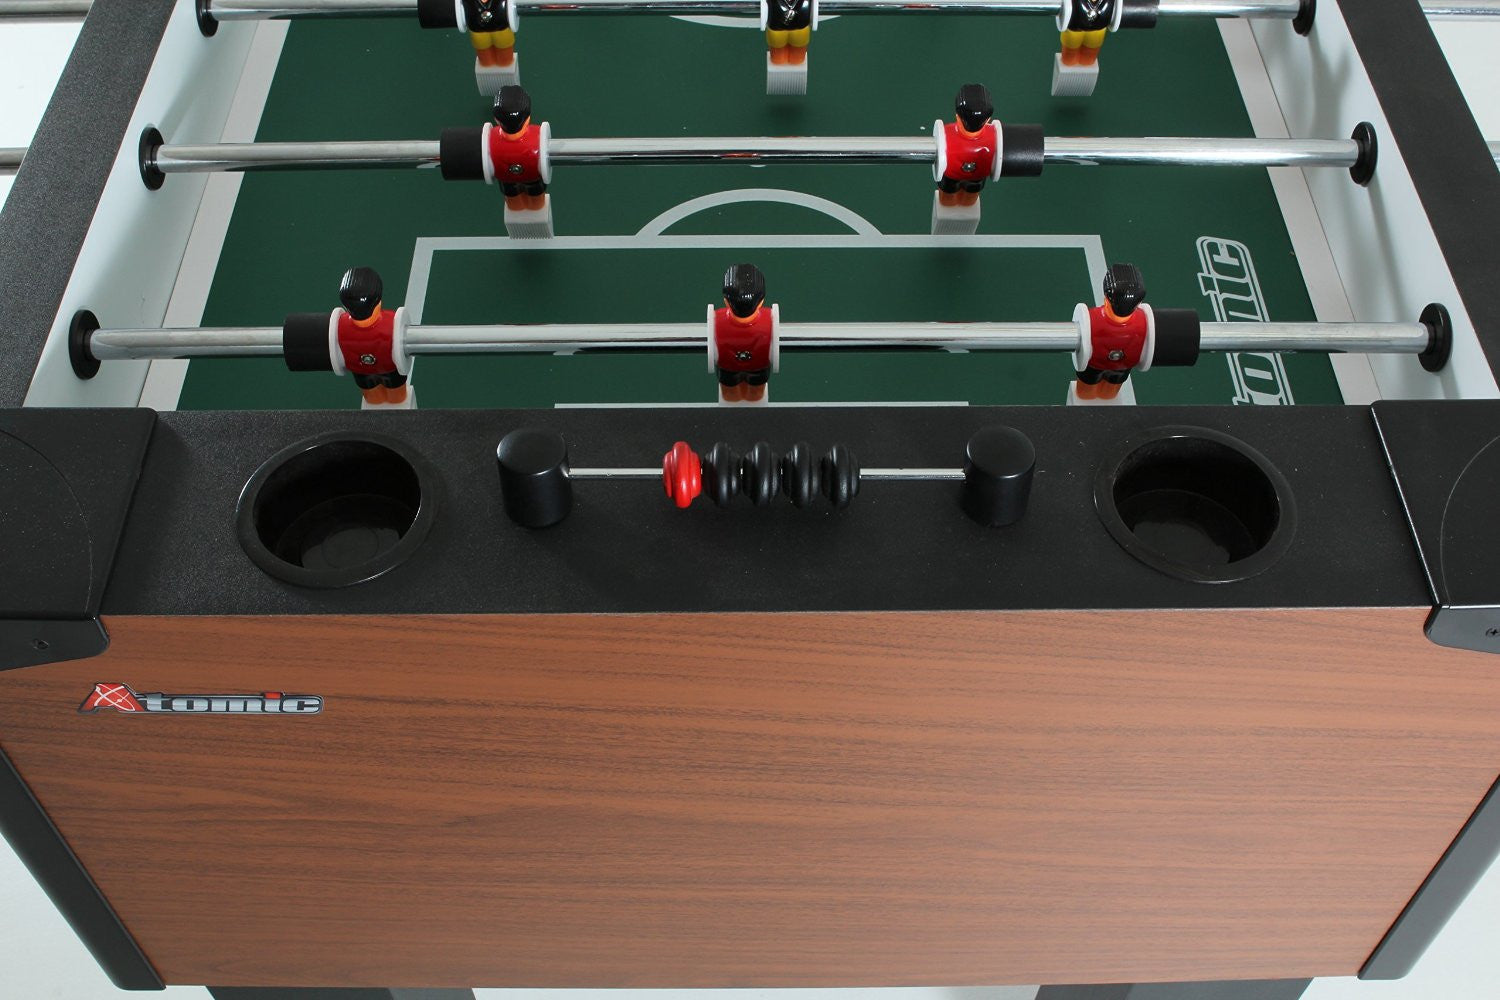 Analog Score Unit on Atomic Gladiator Foosball Table by DMI available at Foosball Planet. 